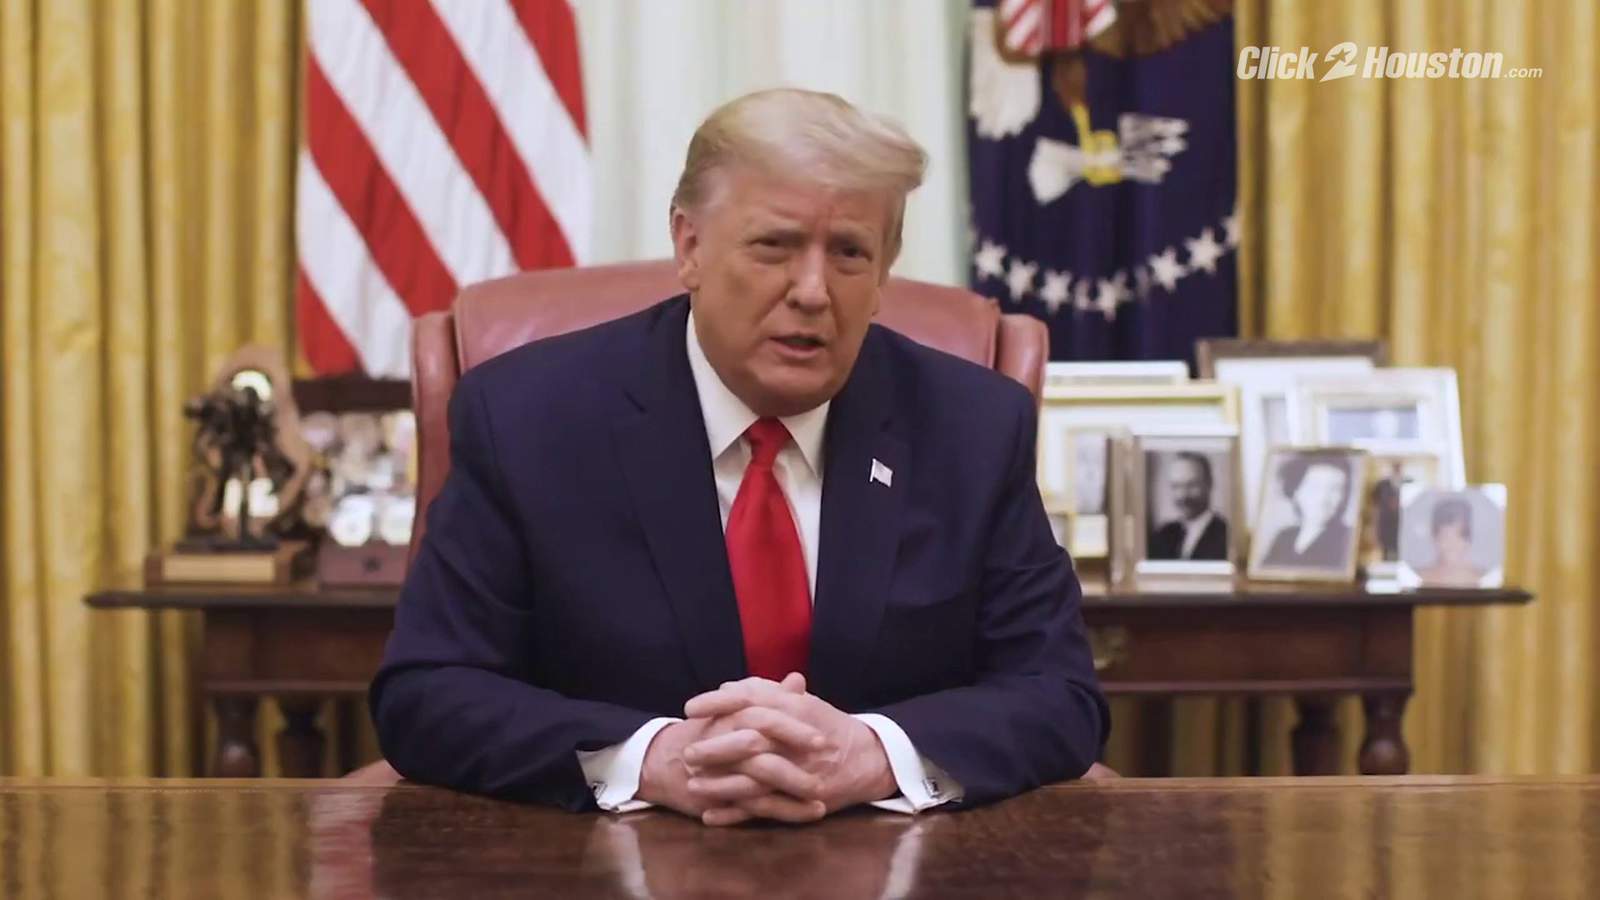 Trump calls for calm in video released after his second impeachment